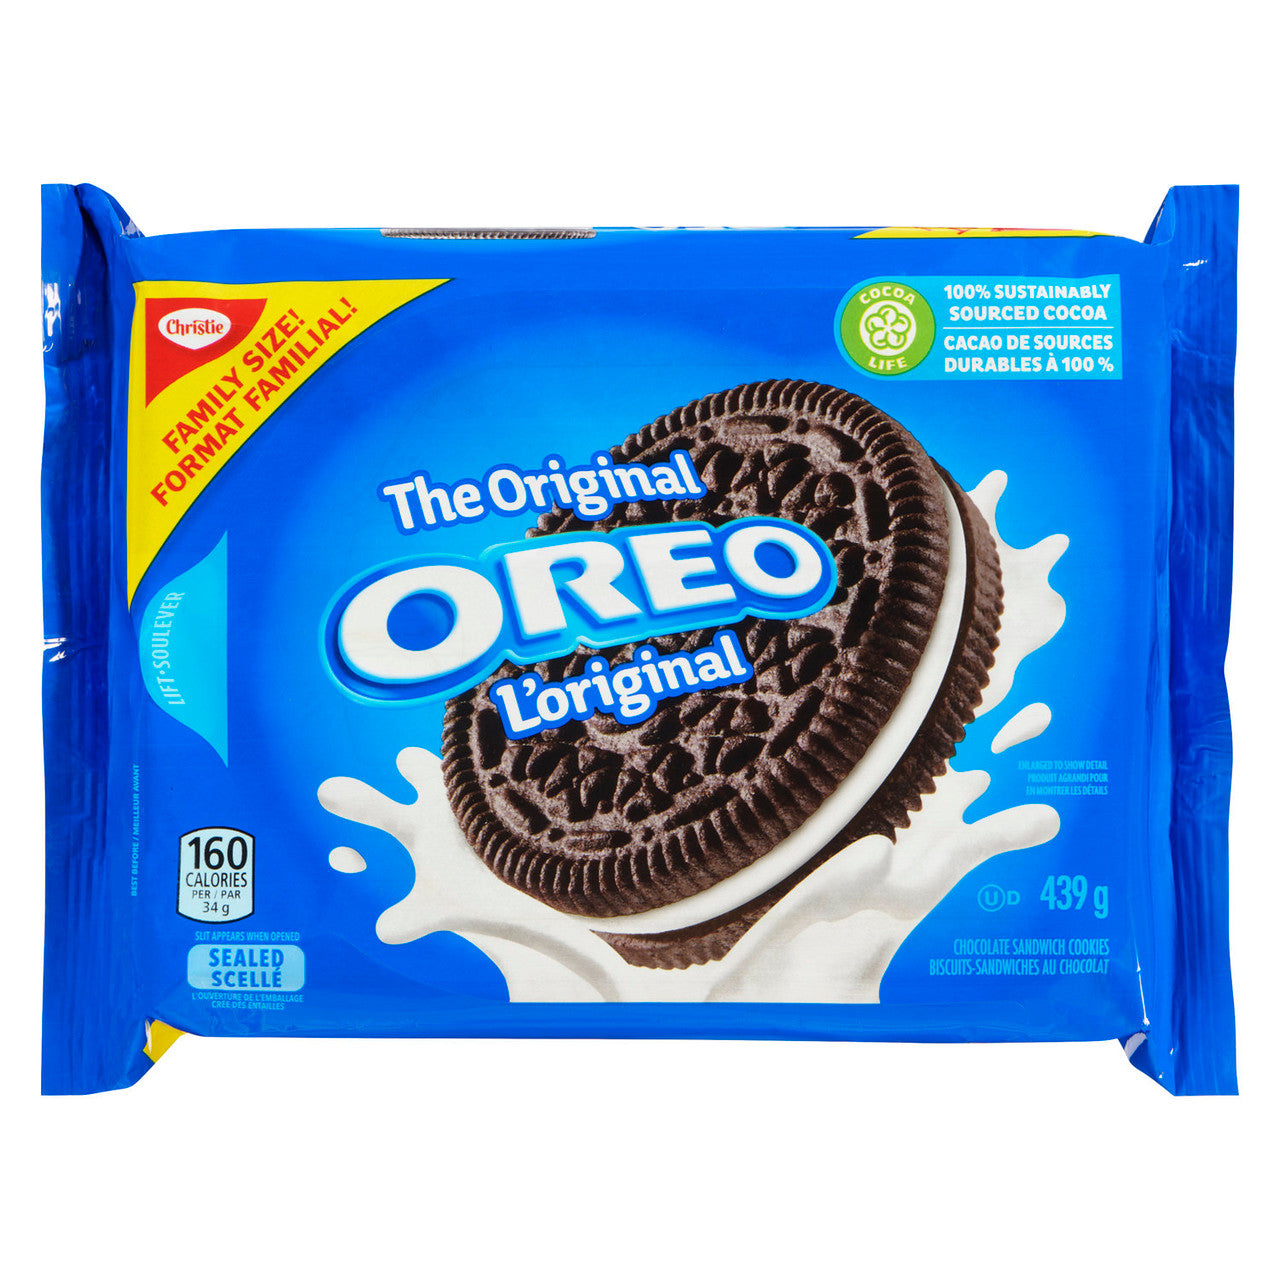 Christie Original Oreo Cookies, Family Size, 439g/15 oz. Package {Imported from Canada}